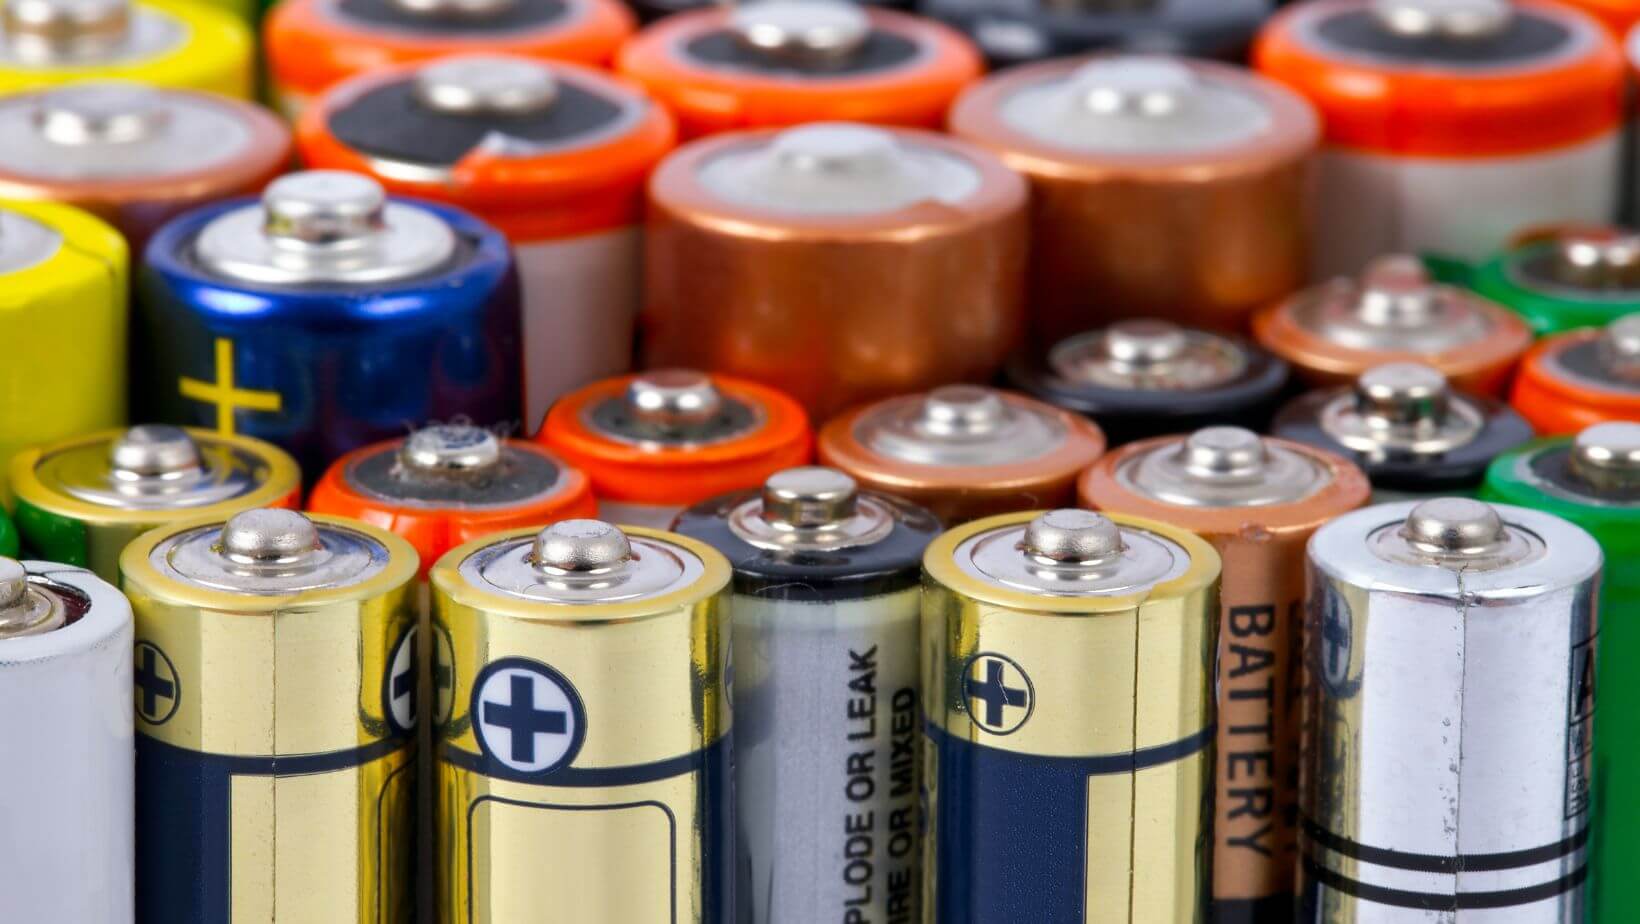 A variety of batteries